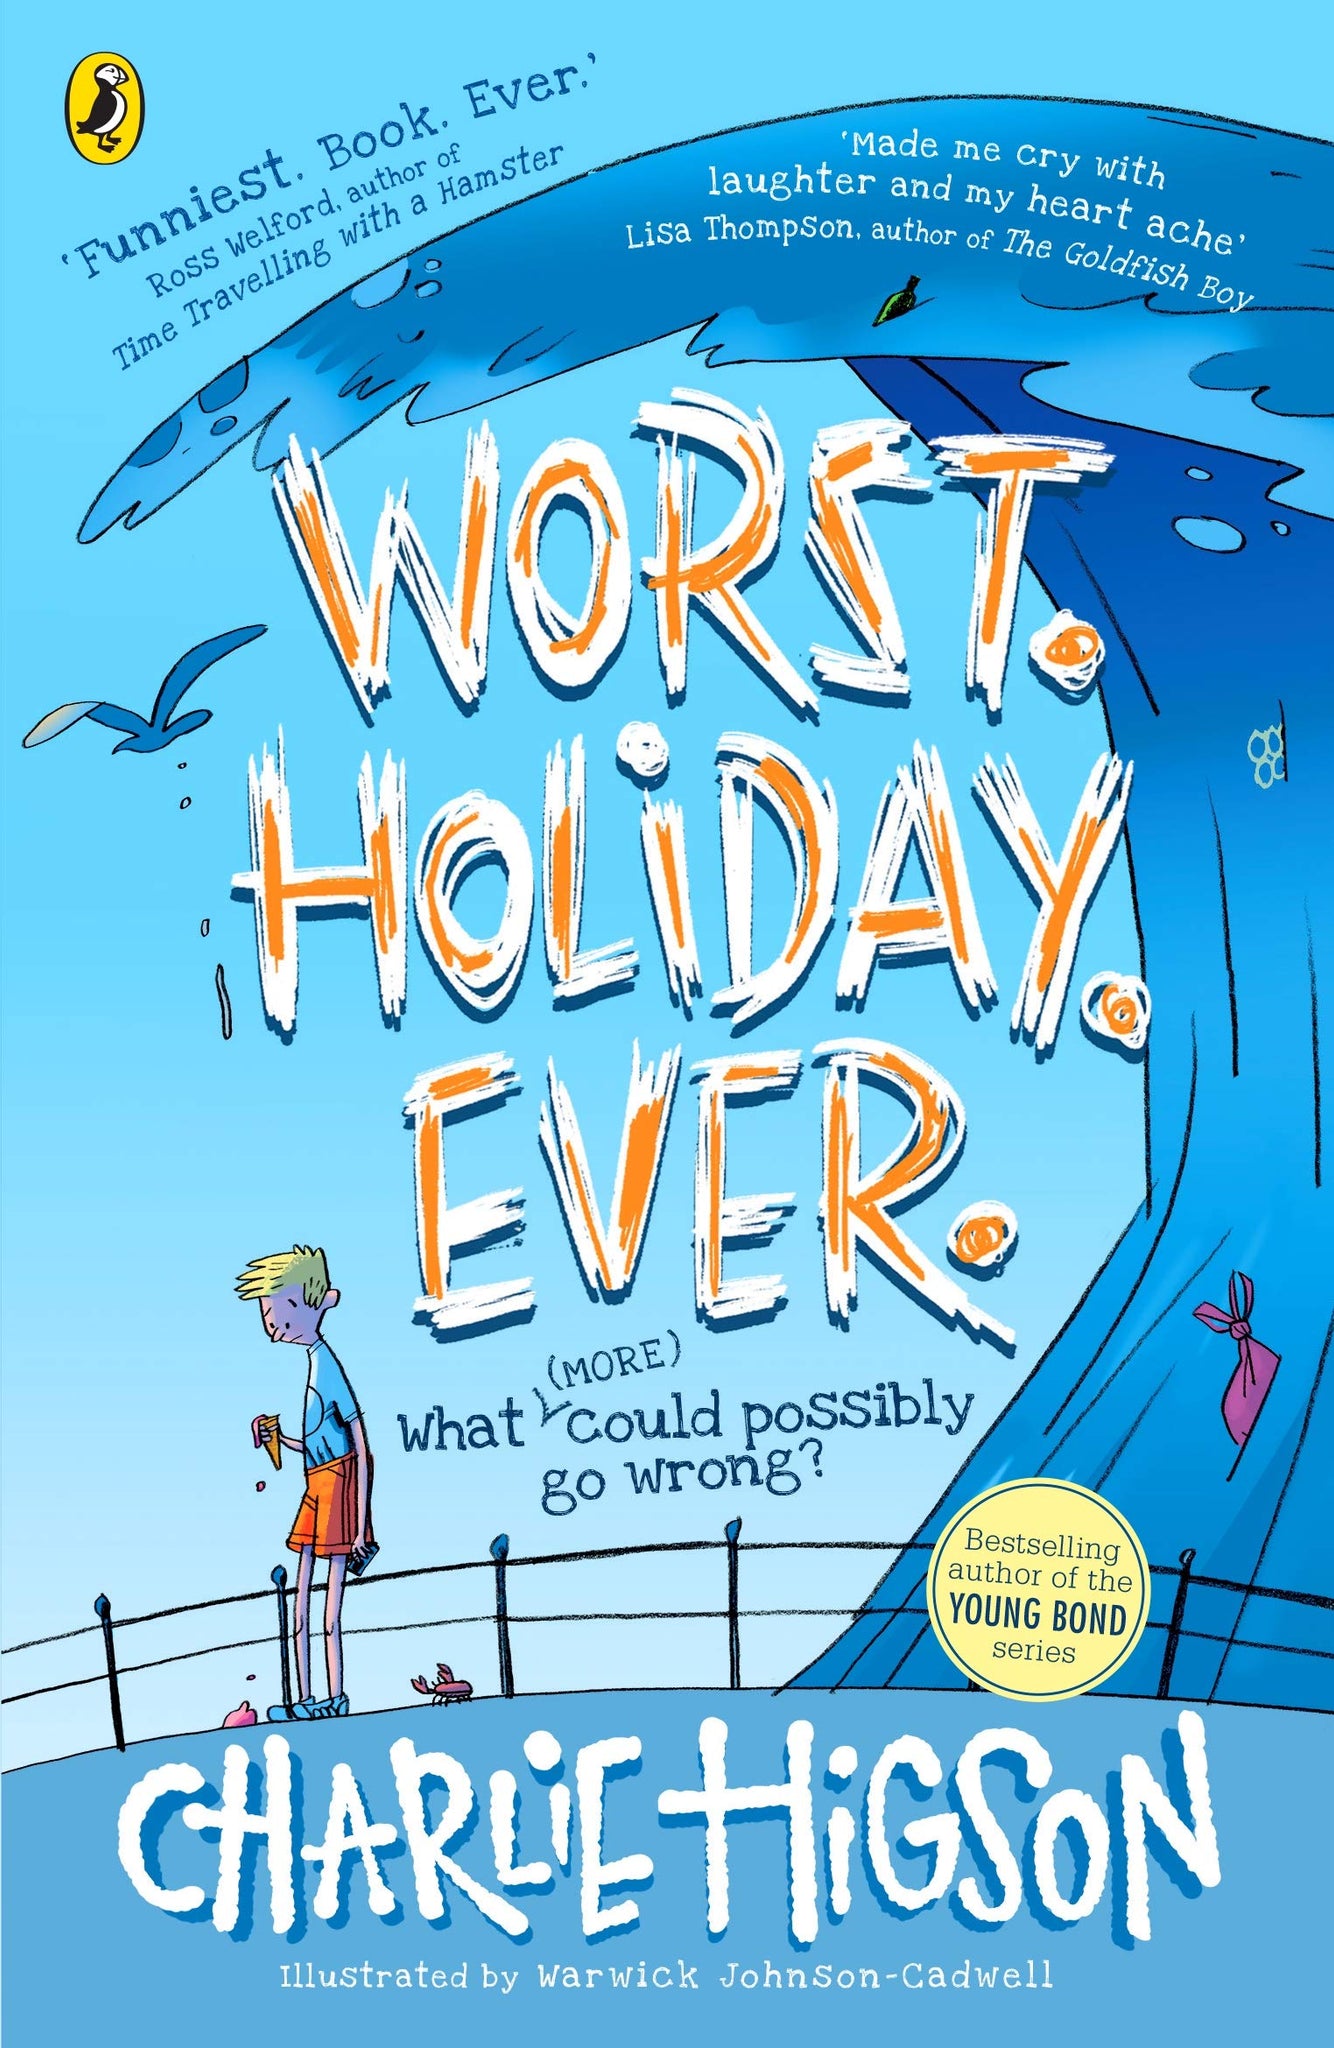 Worst. Holiday. Ever (Private) - Paperback